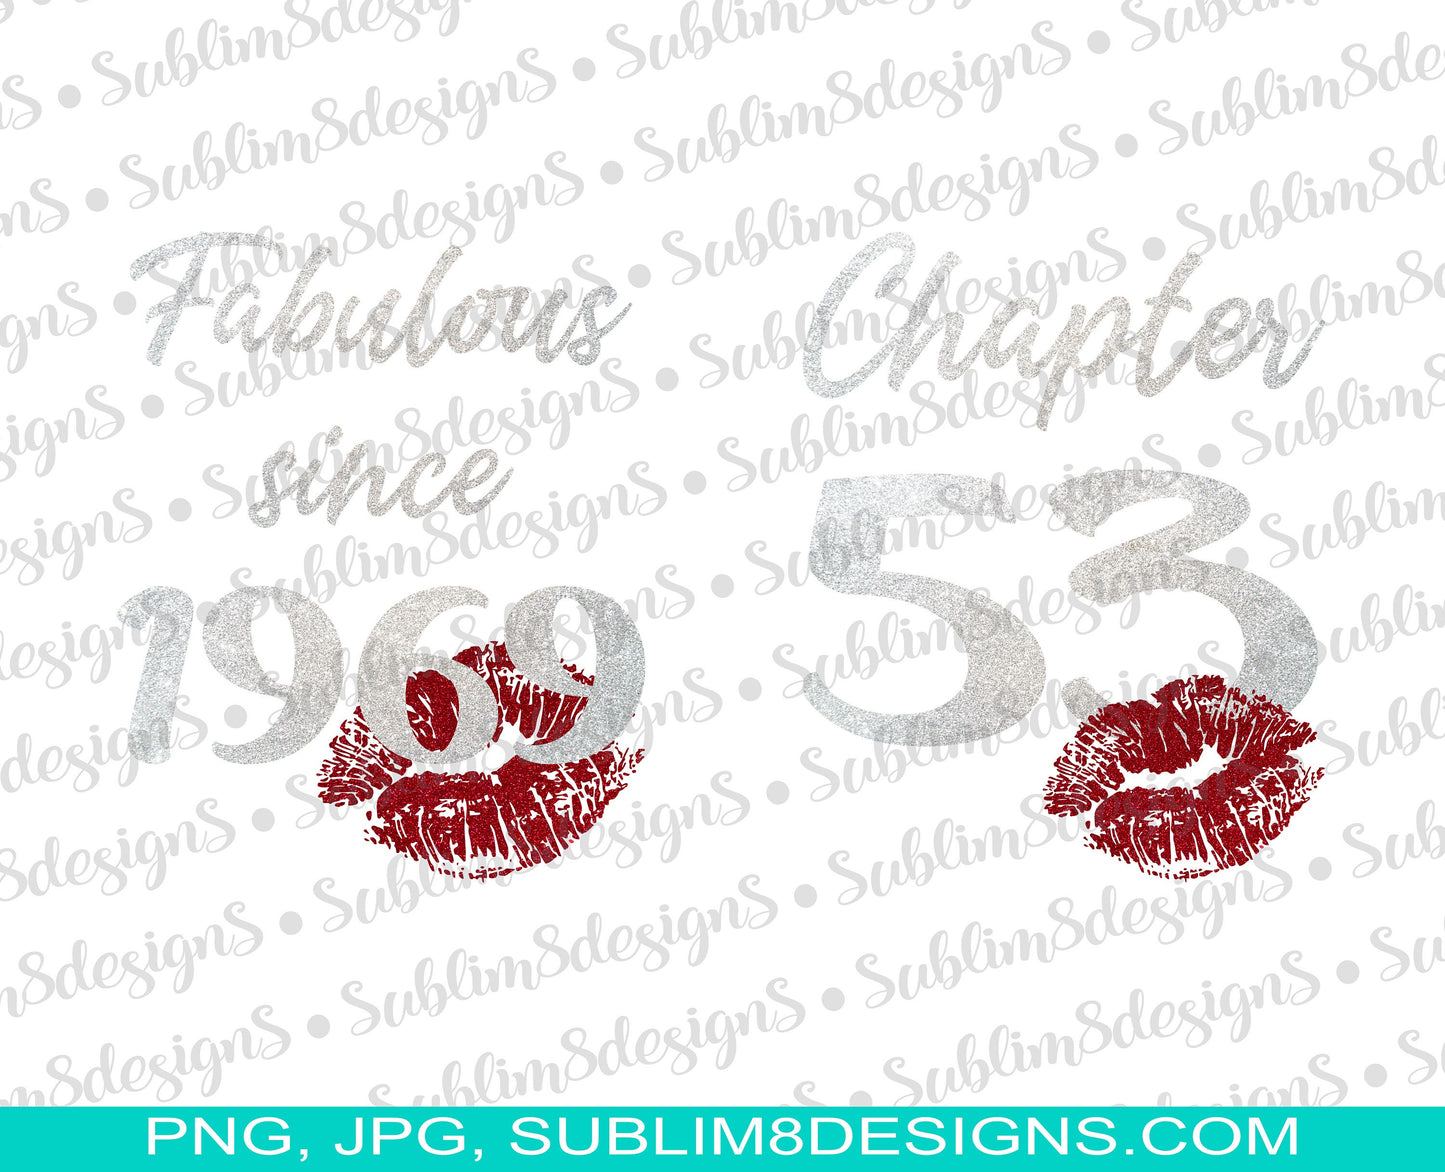 Personalized Fabulous Since 1969 Chapter 53 Designs PNG and JPG ONLY